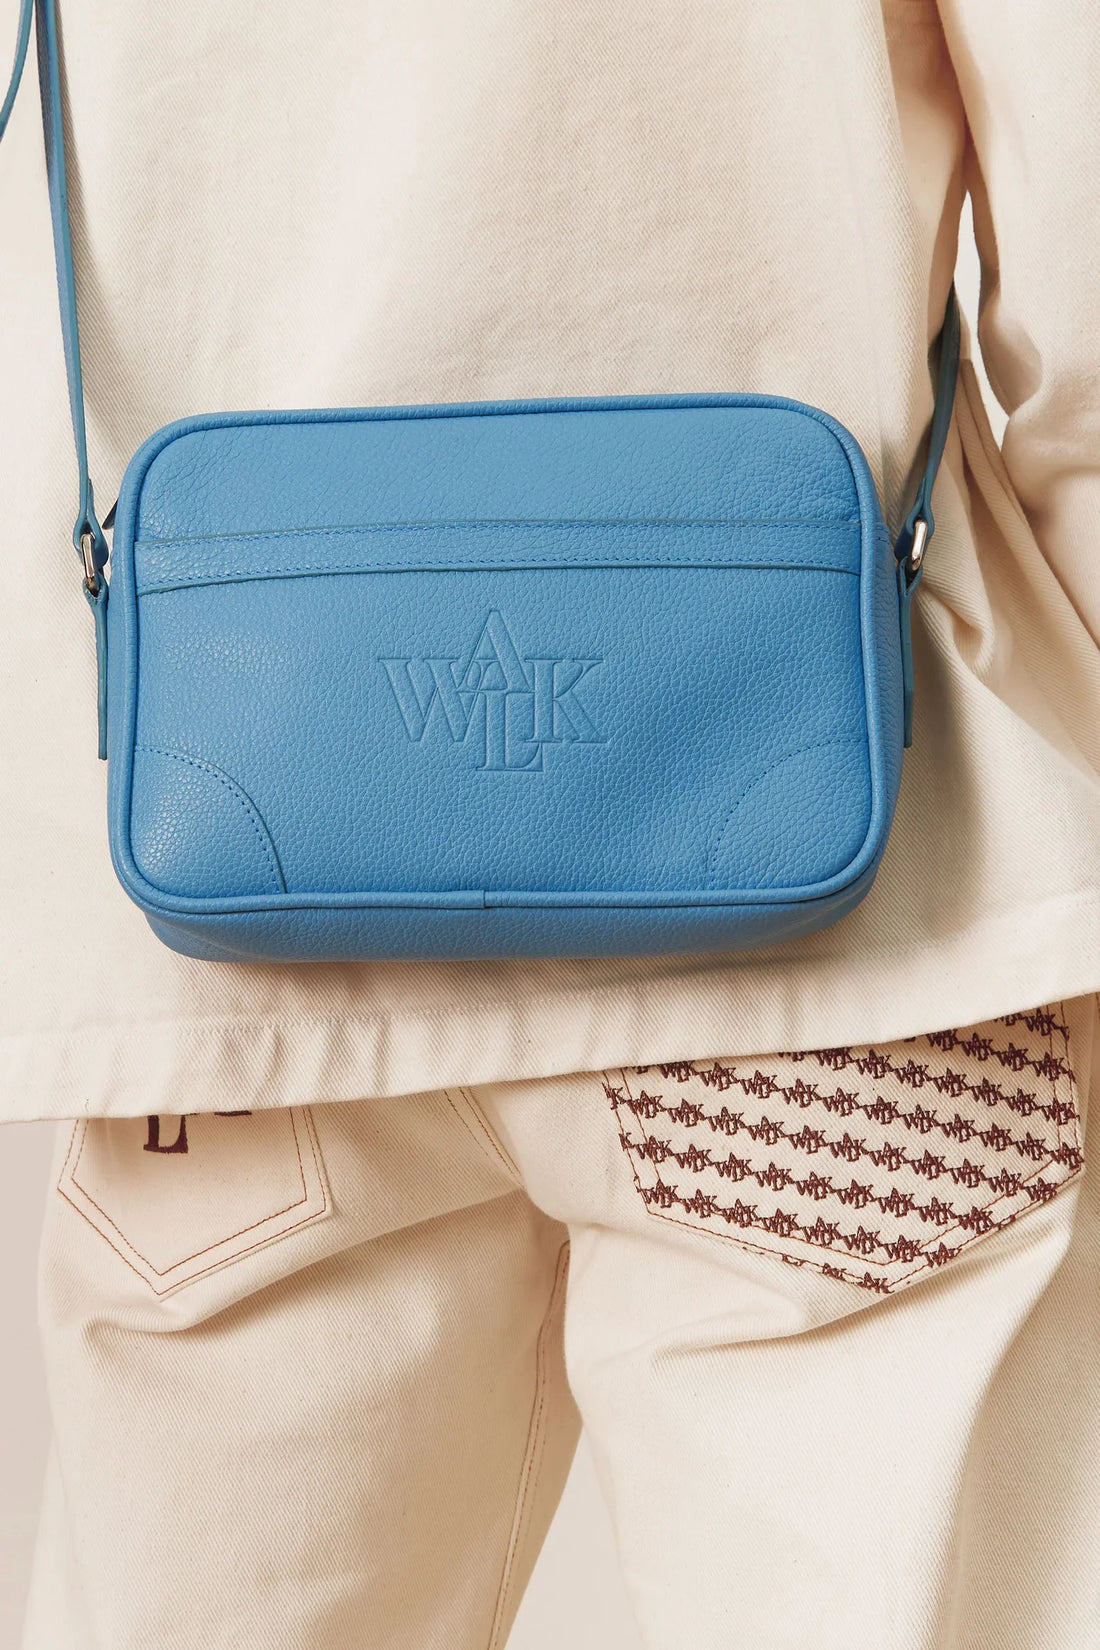 THE BLUE LEATHER BAG